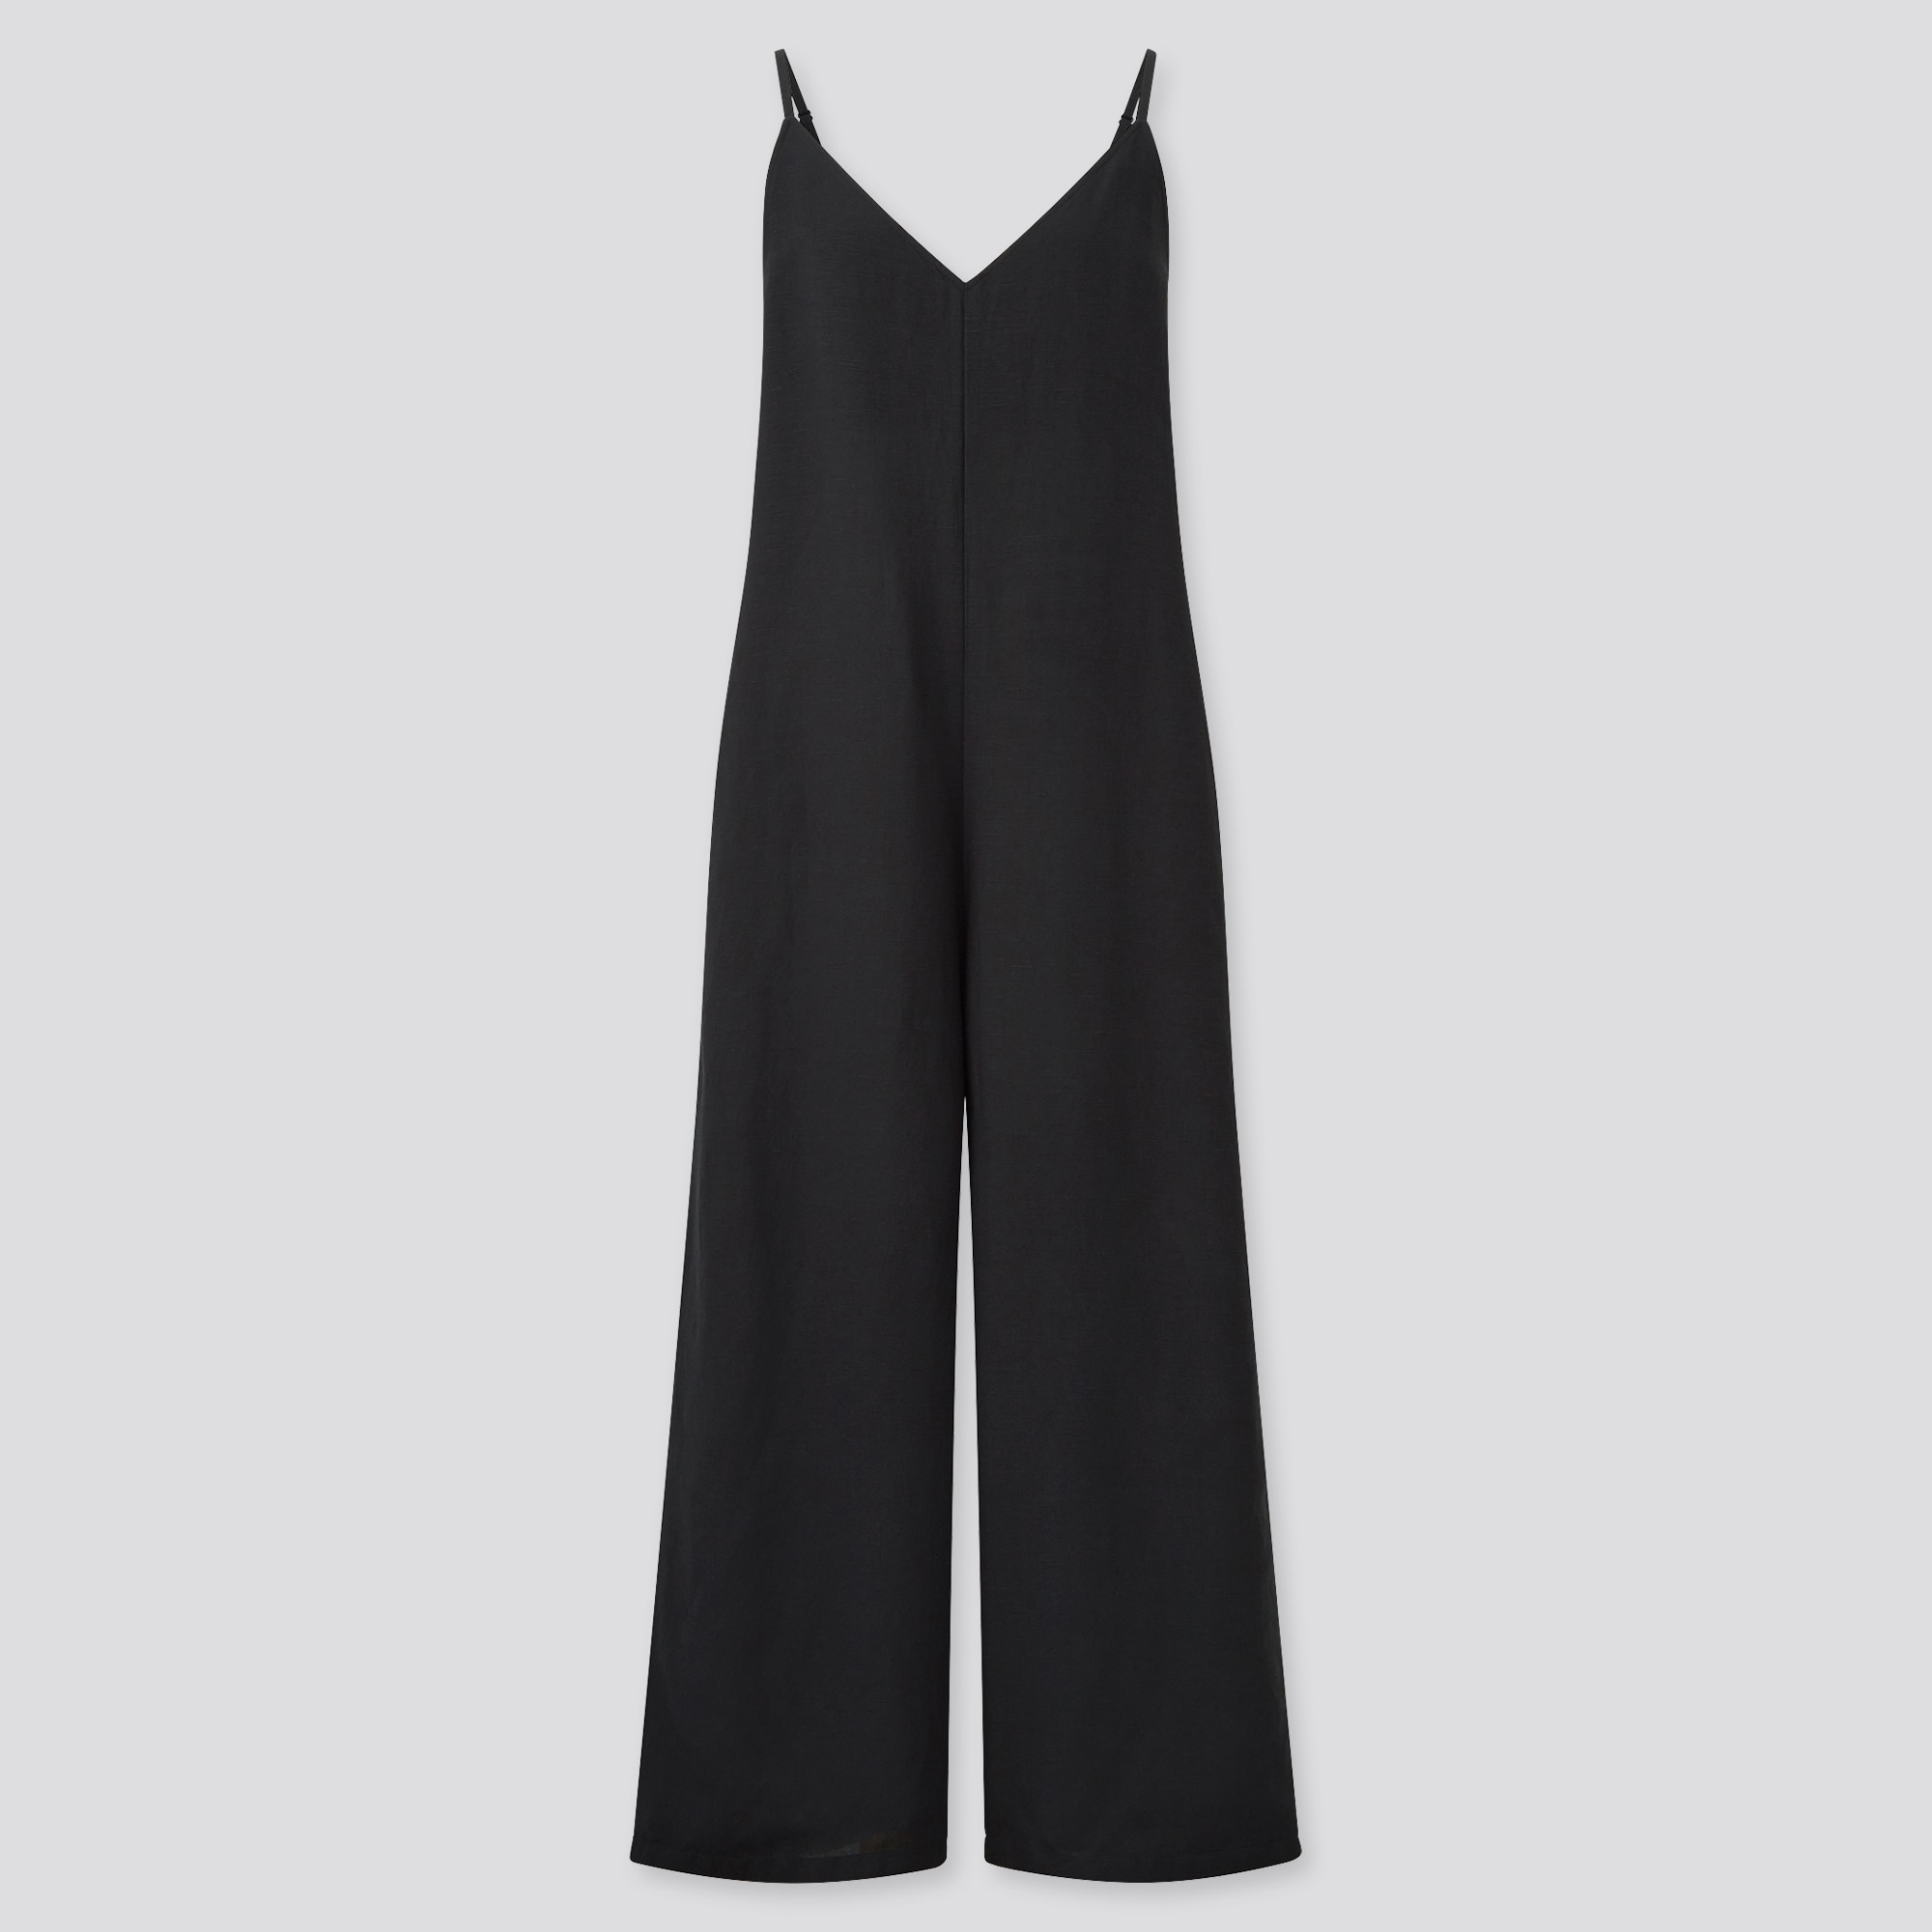 UNIQLO Women's Camisole Jumpsuit (€38) ❤ liked on Polyvore